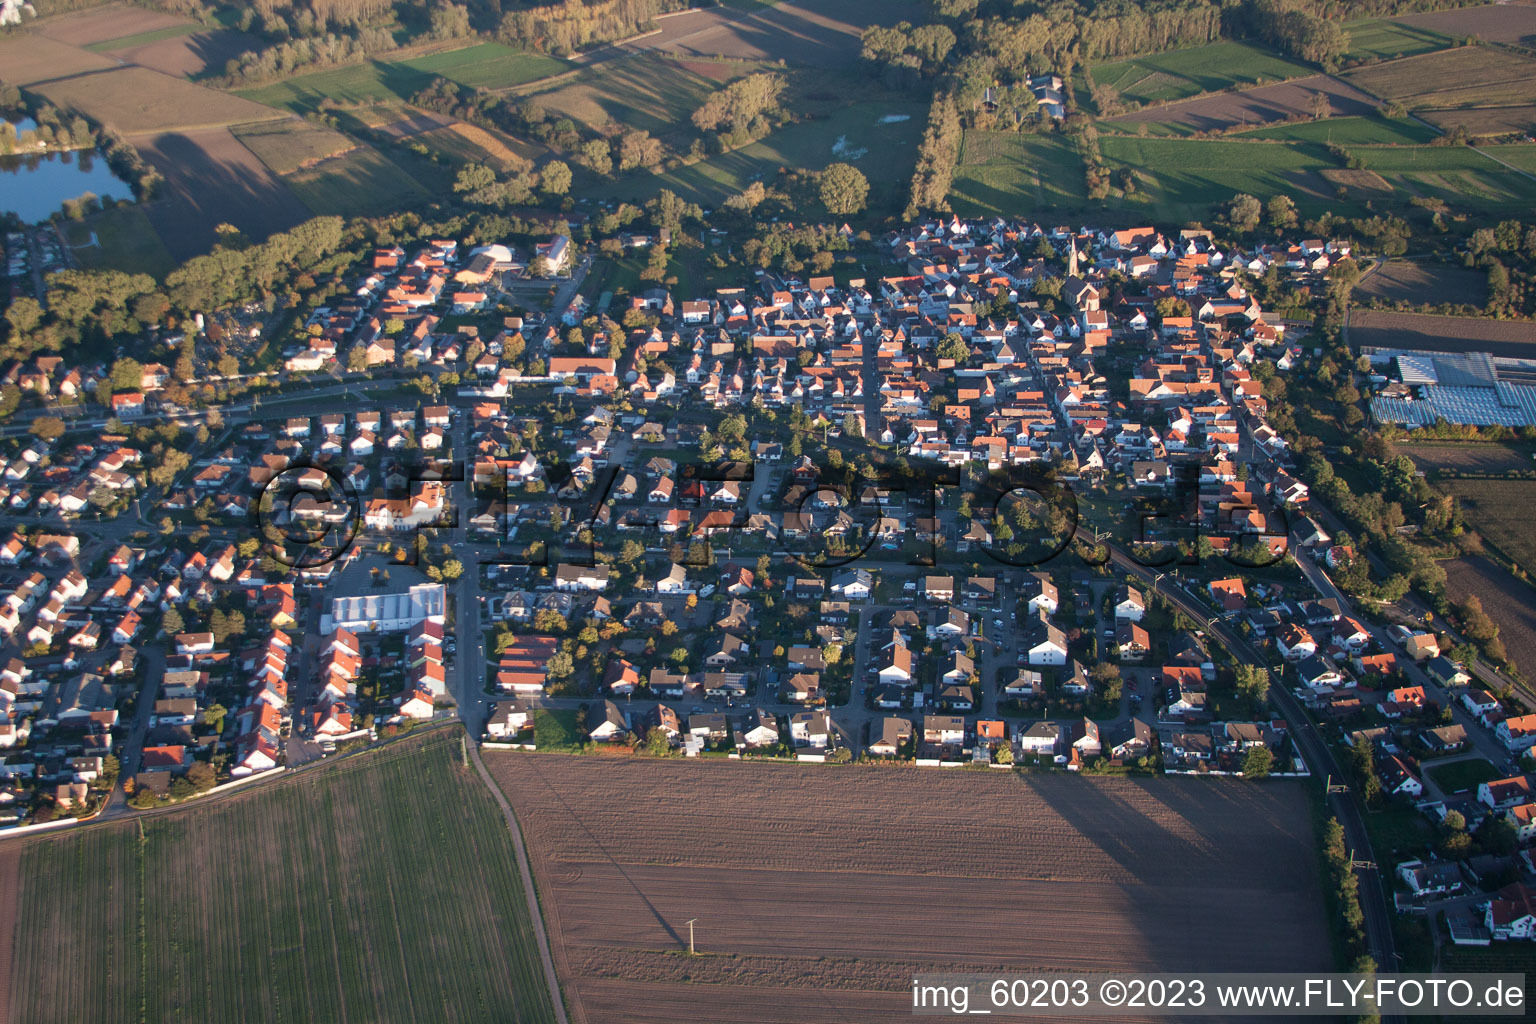 Germersheim in the state Rhineland-Palatinate, Germany seen from a drone